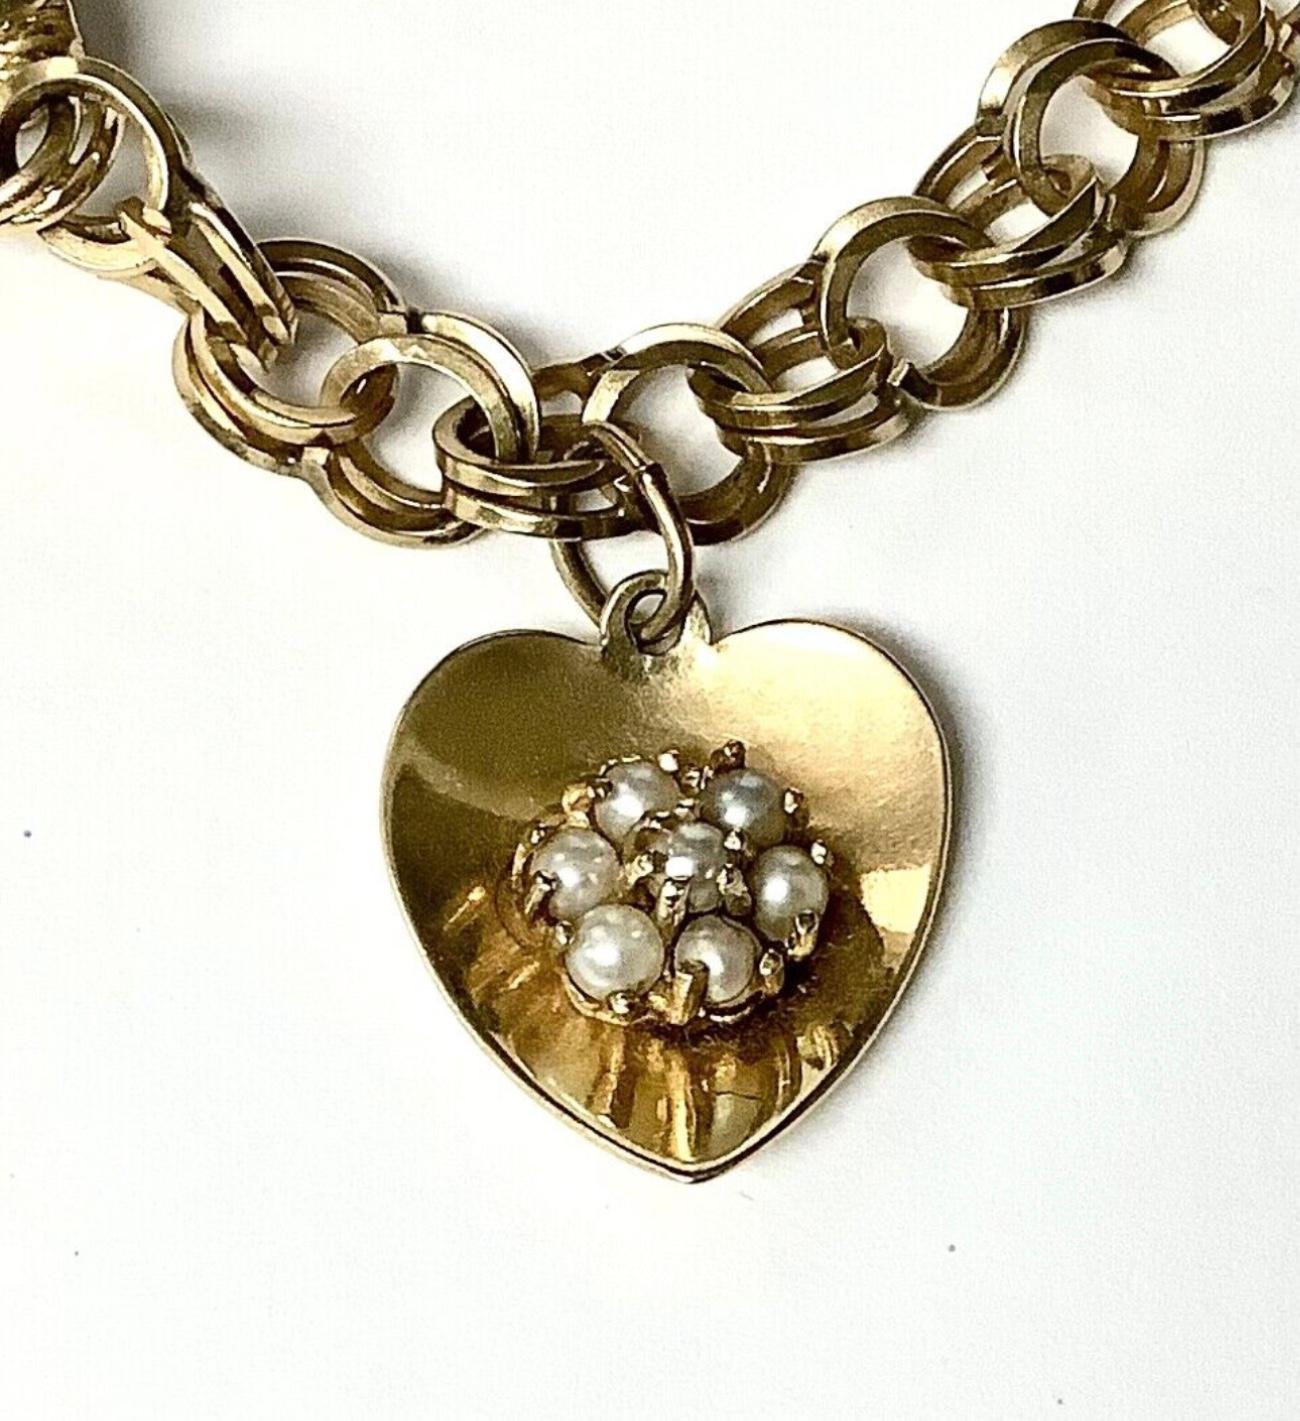 14k yellow gold chain bracelet with cluster of pearls in heart charm. 7 1/2 inches.
Marked 14k. 